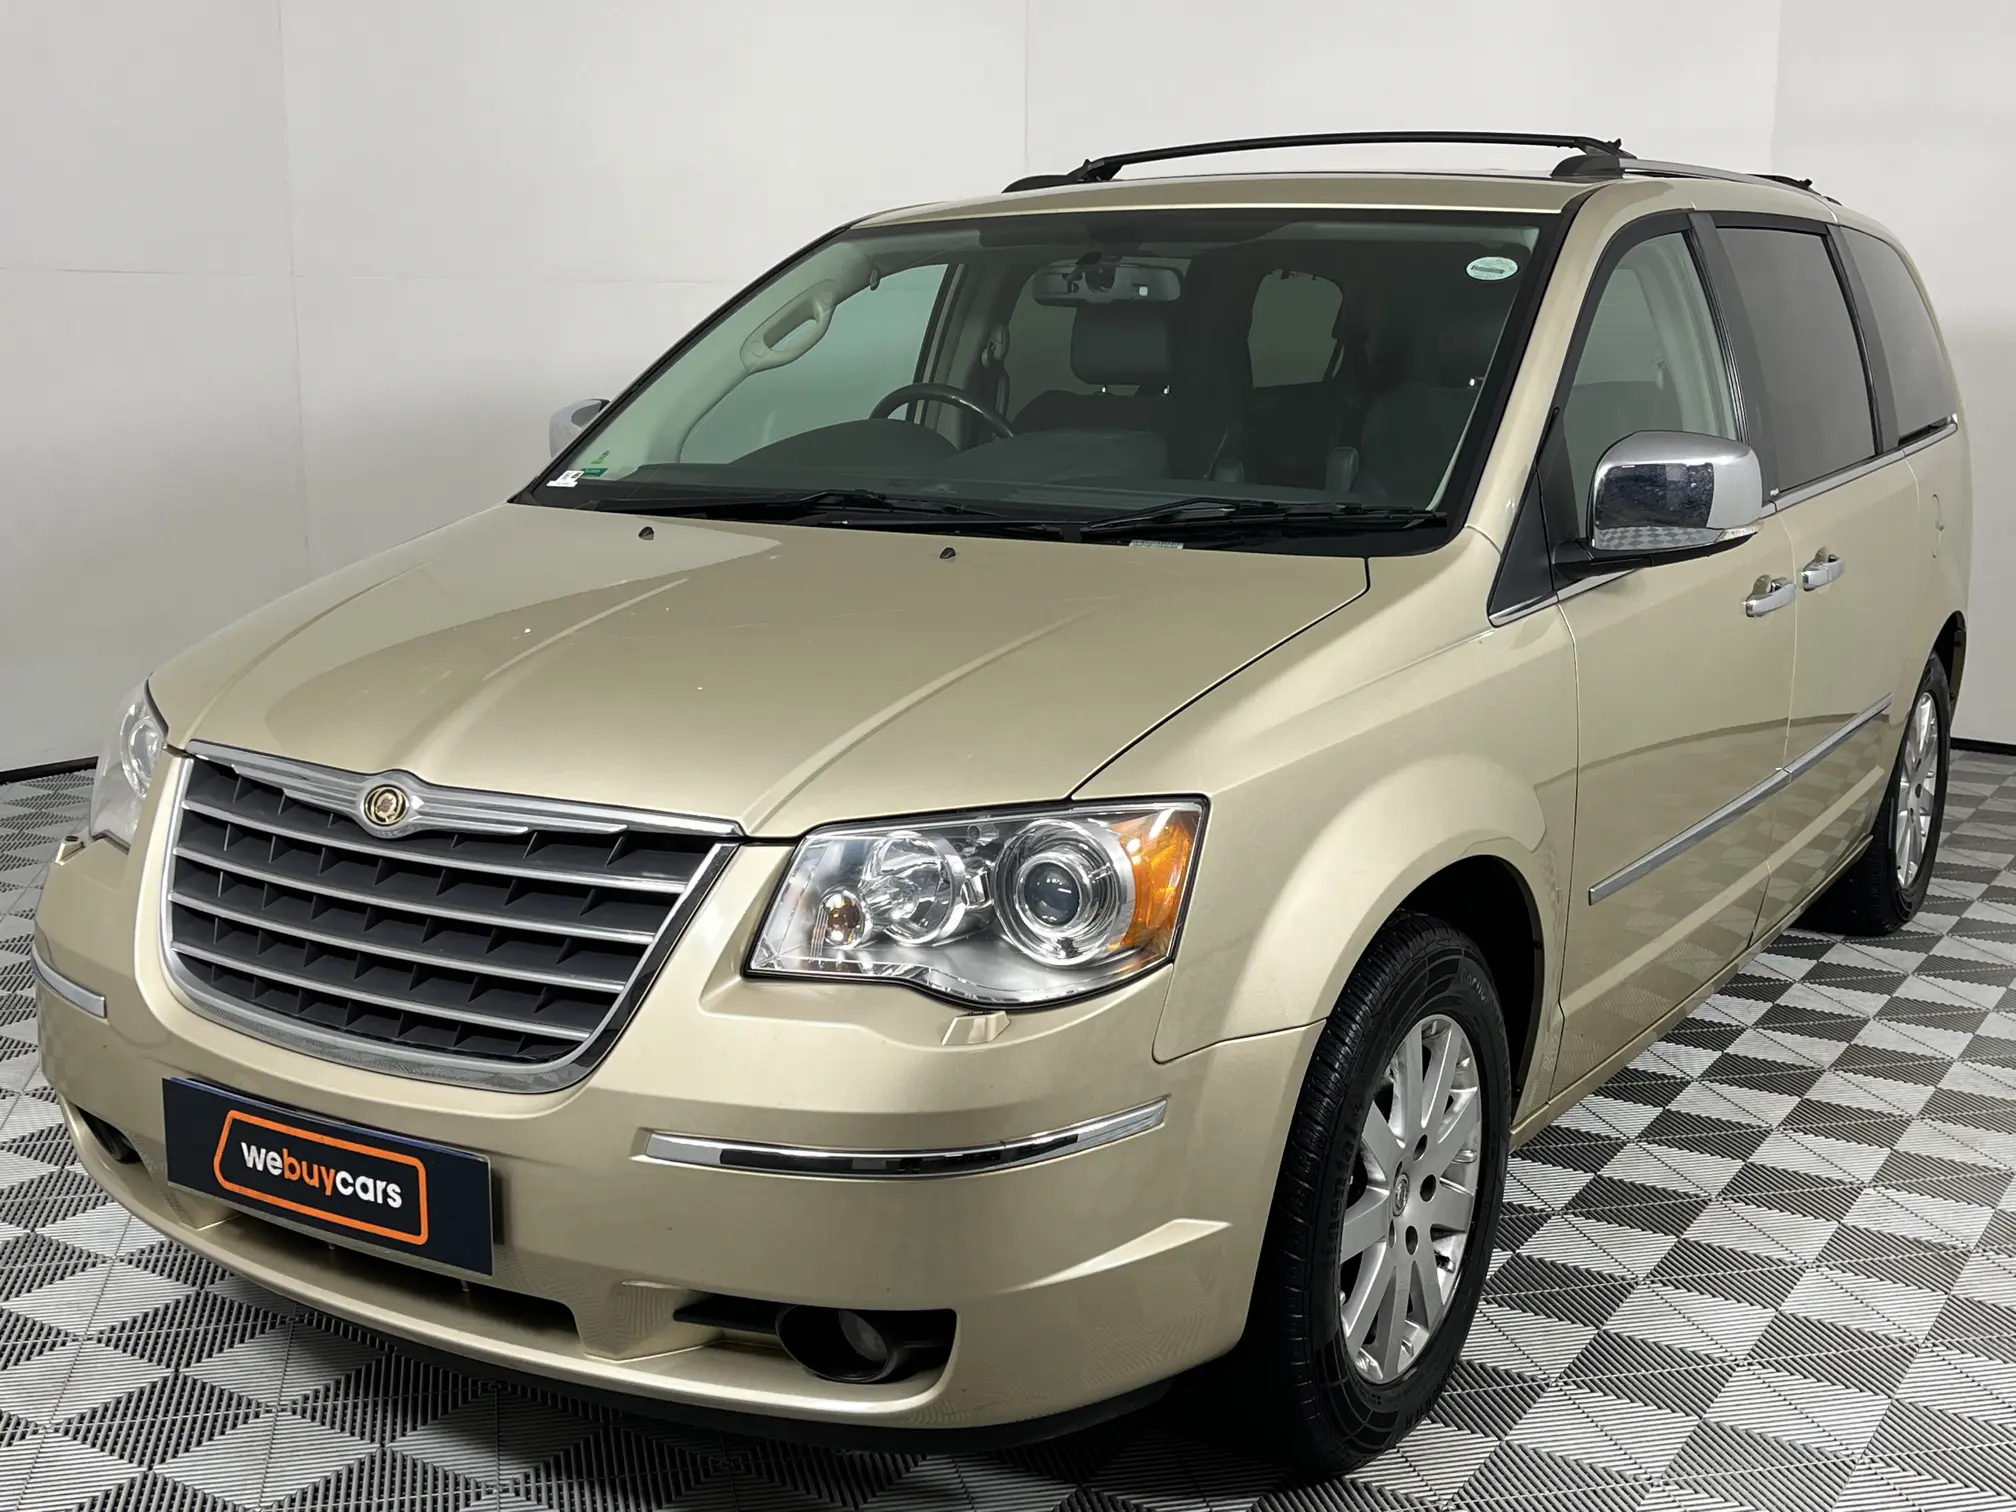 2011 Chrysler Grand Voyager 3.8 Limited Auto